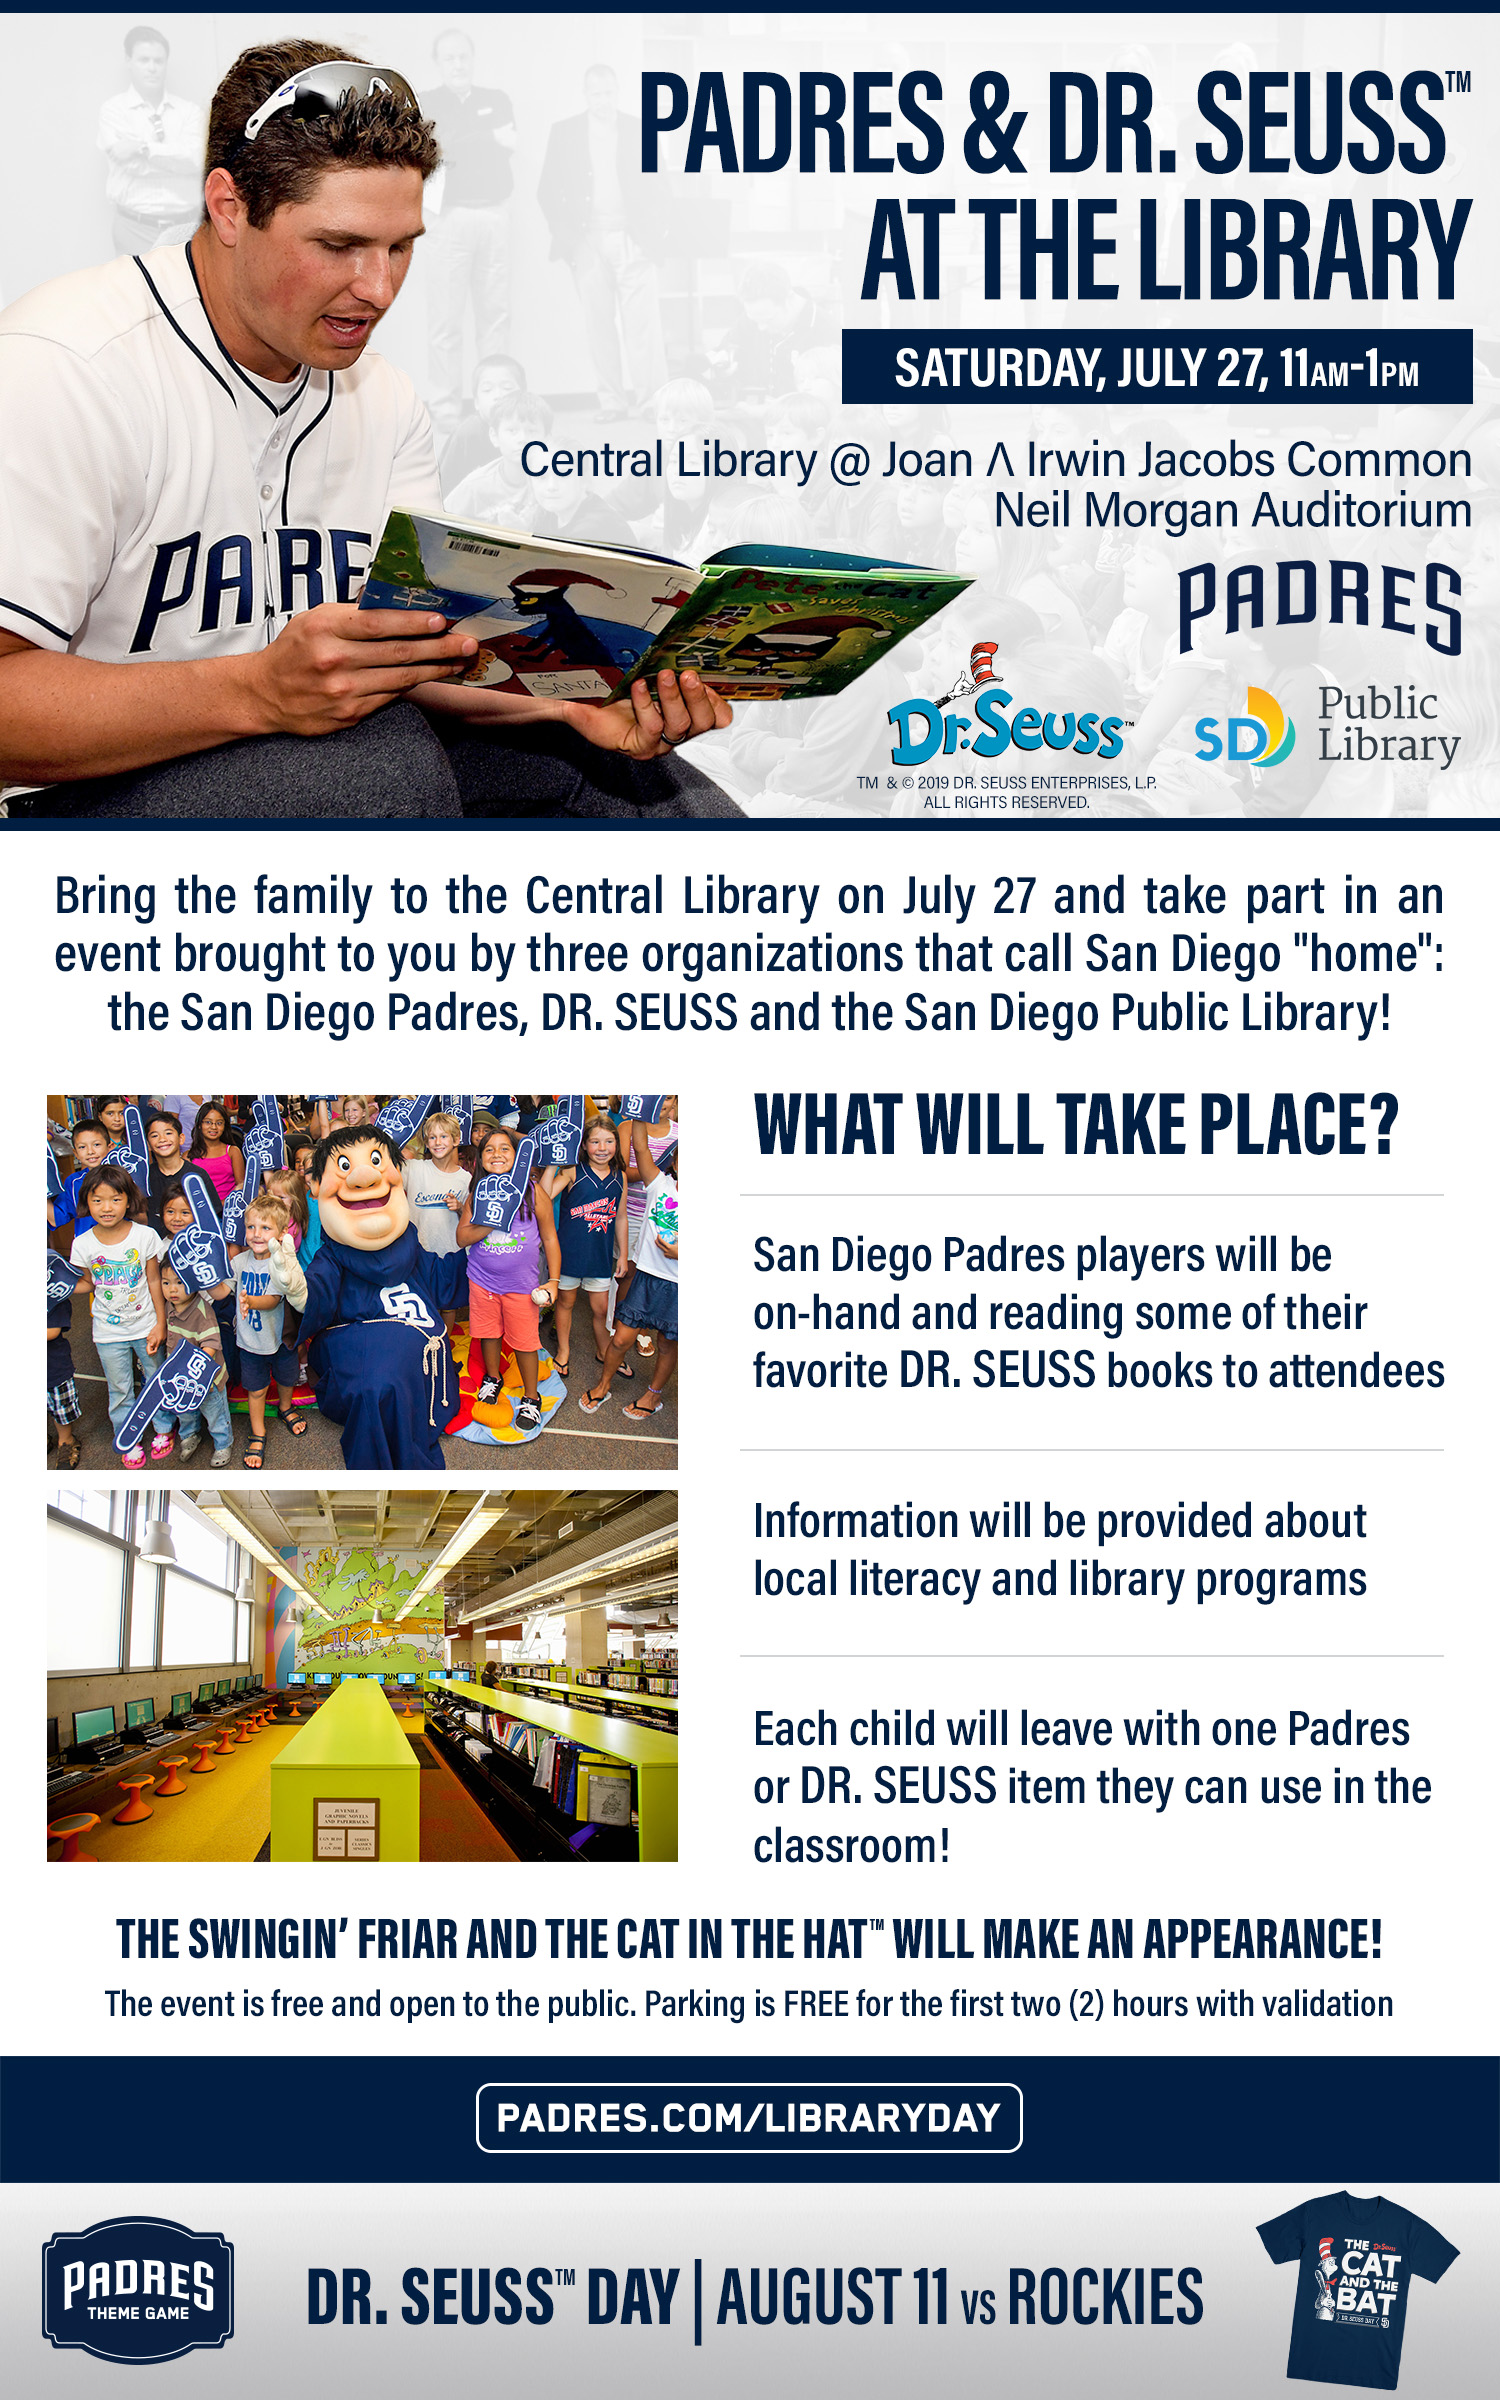 Padres and Dr. Seuss at the library